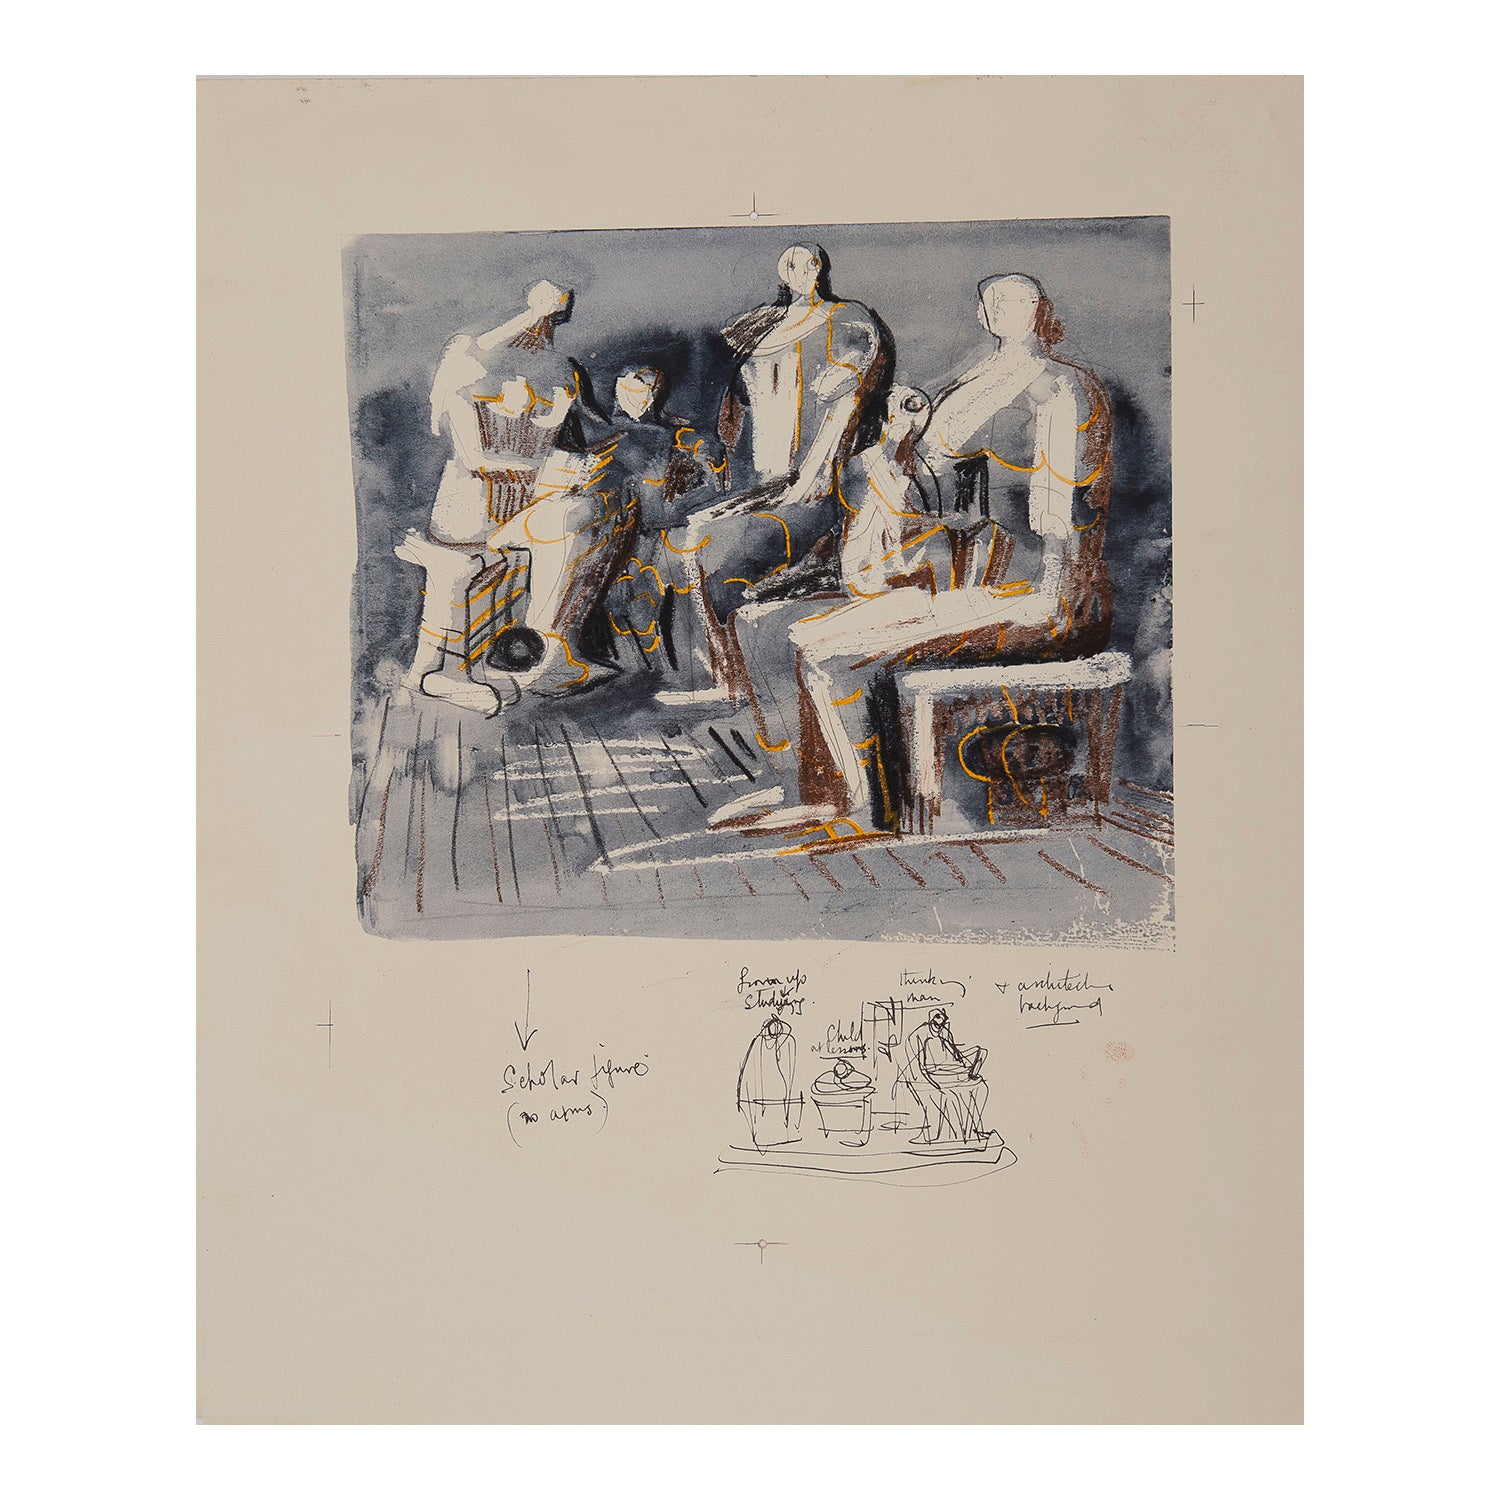 lithographic proof, Scholar Group, by Henry Moore (1898-1986), Curwen Press, 1958. From the portfolio Heads, Figures, and Ideas, printed by Curwen Studio